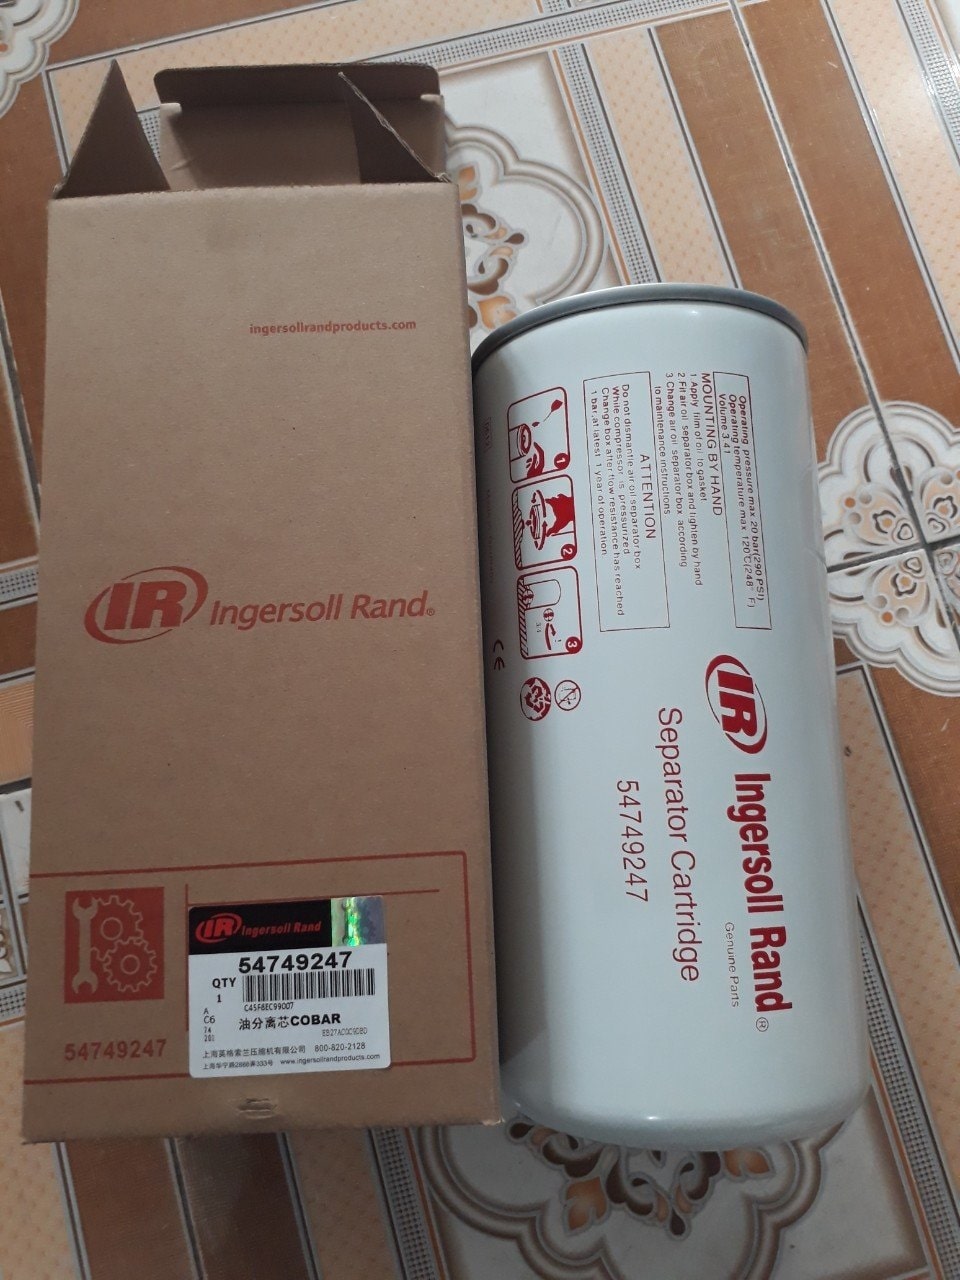 Lọc tách Ingersollrand 54749274